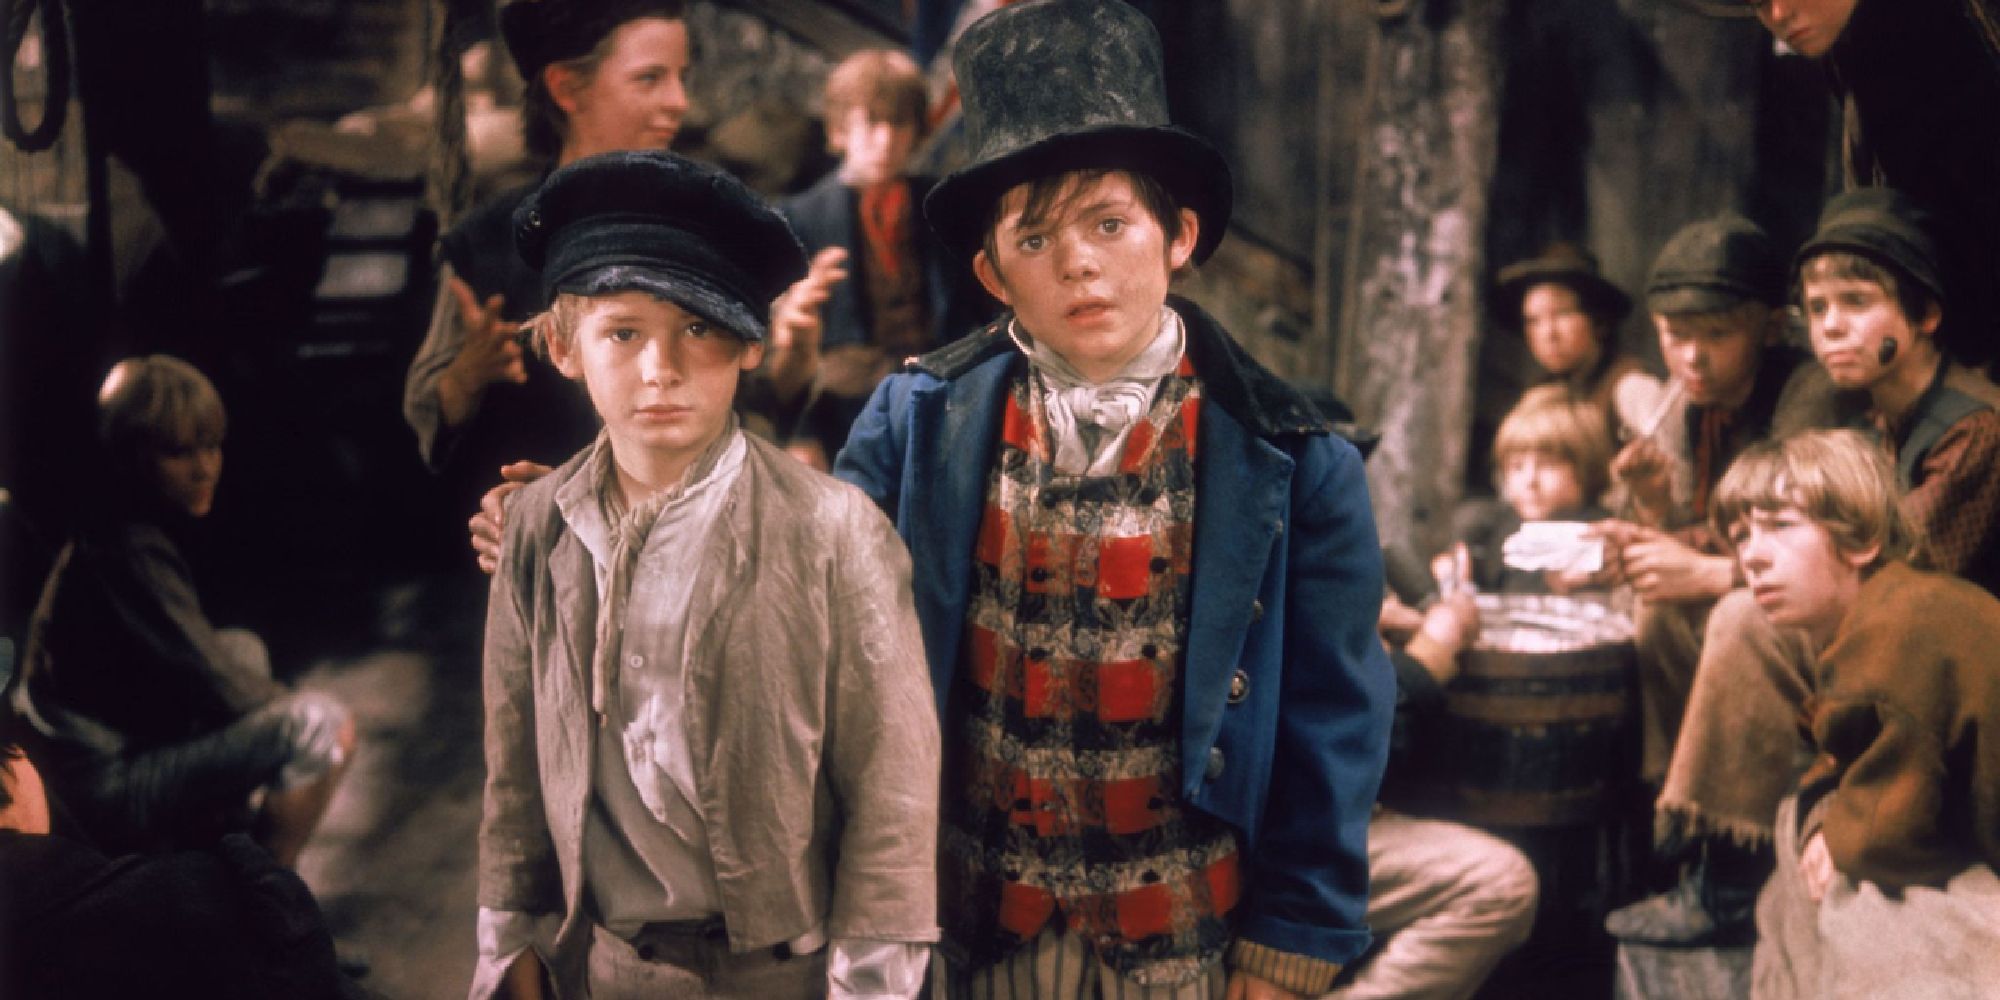 Oliver and another boy look off-camera with a hopeful expresison in the film Oliver!